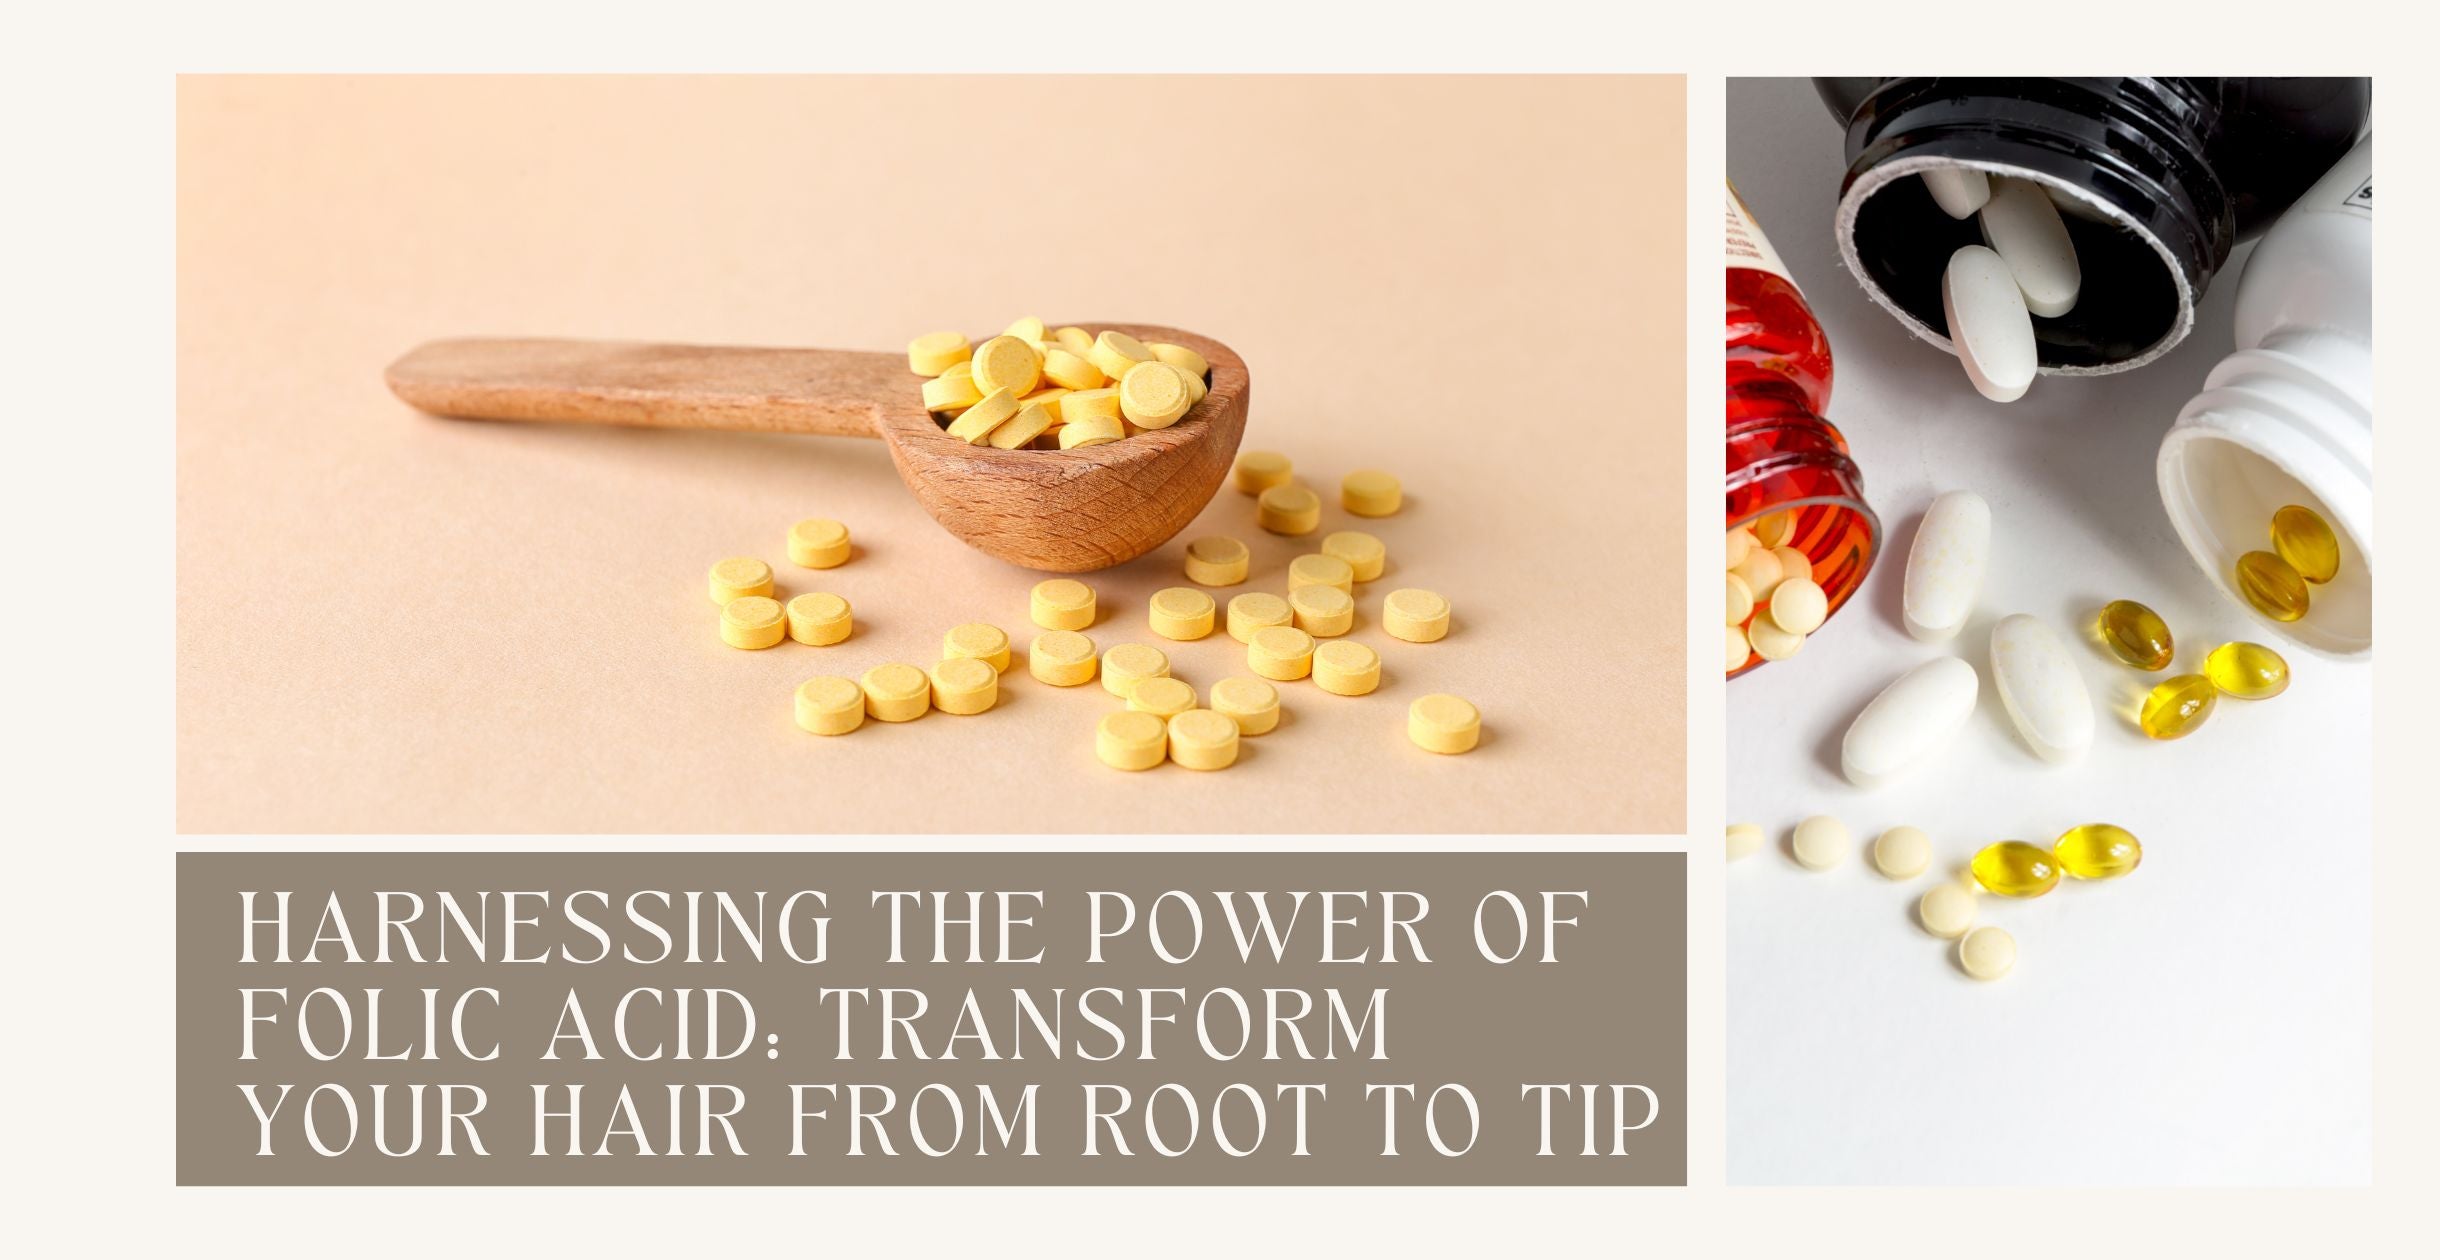 Harnessing the Power of Folic Acid: Transform Your Hair from Root to Tip